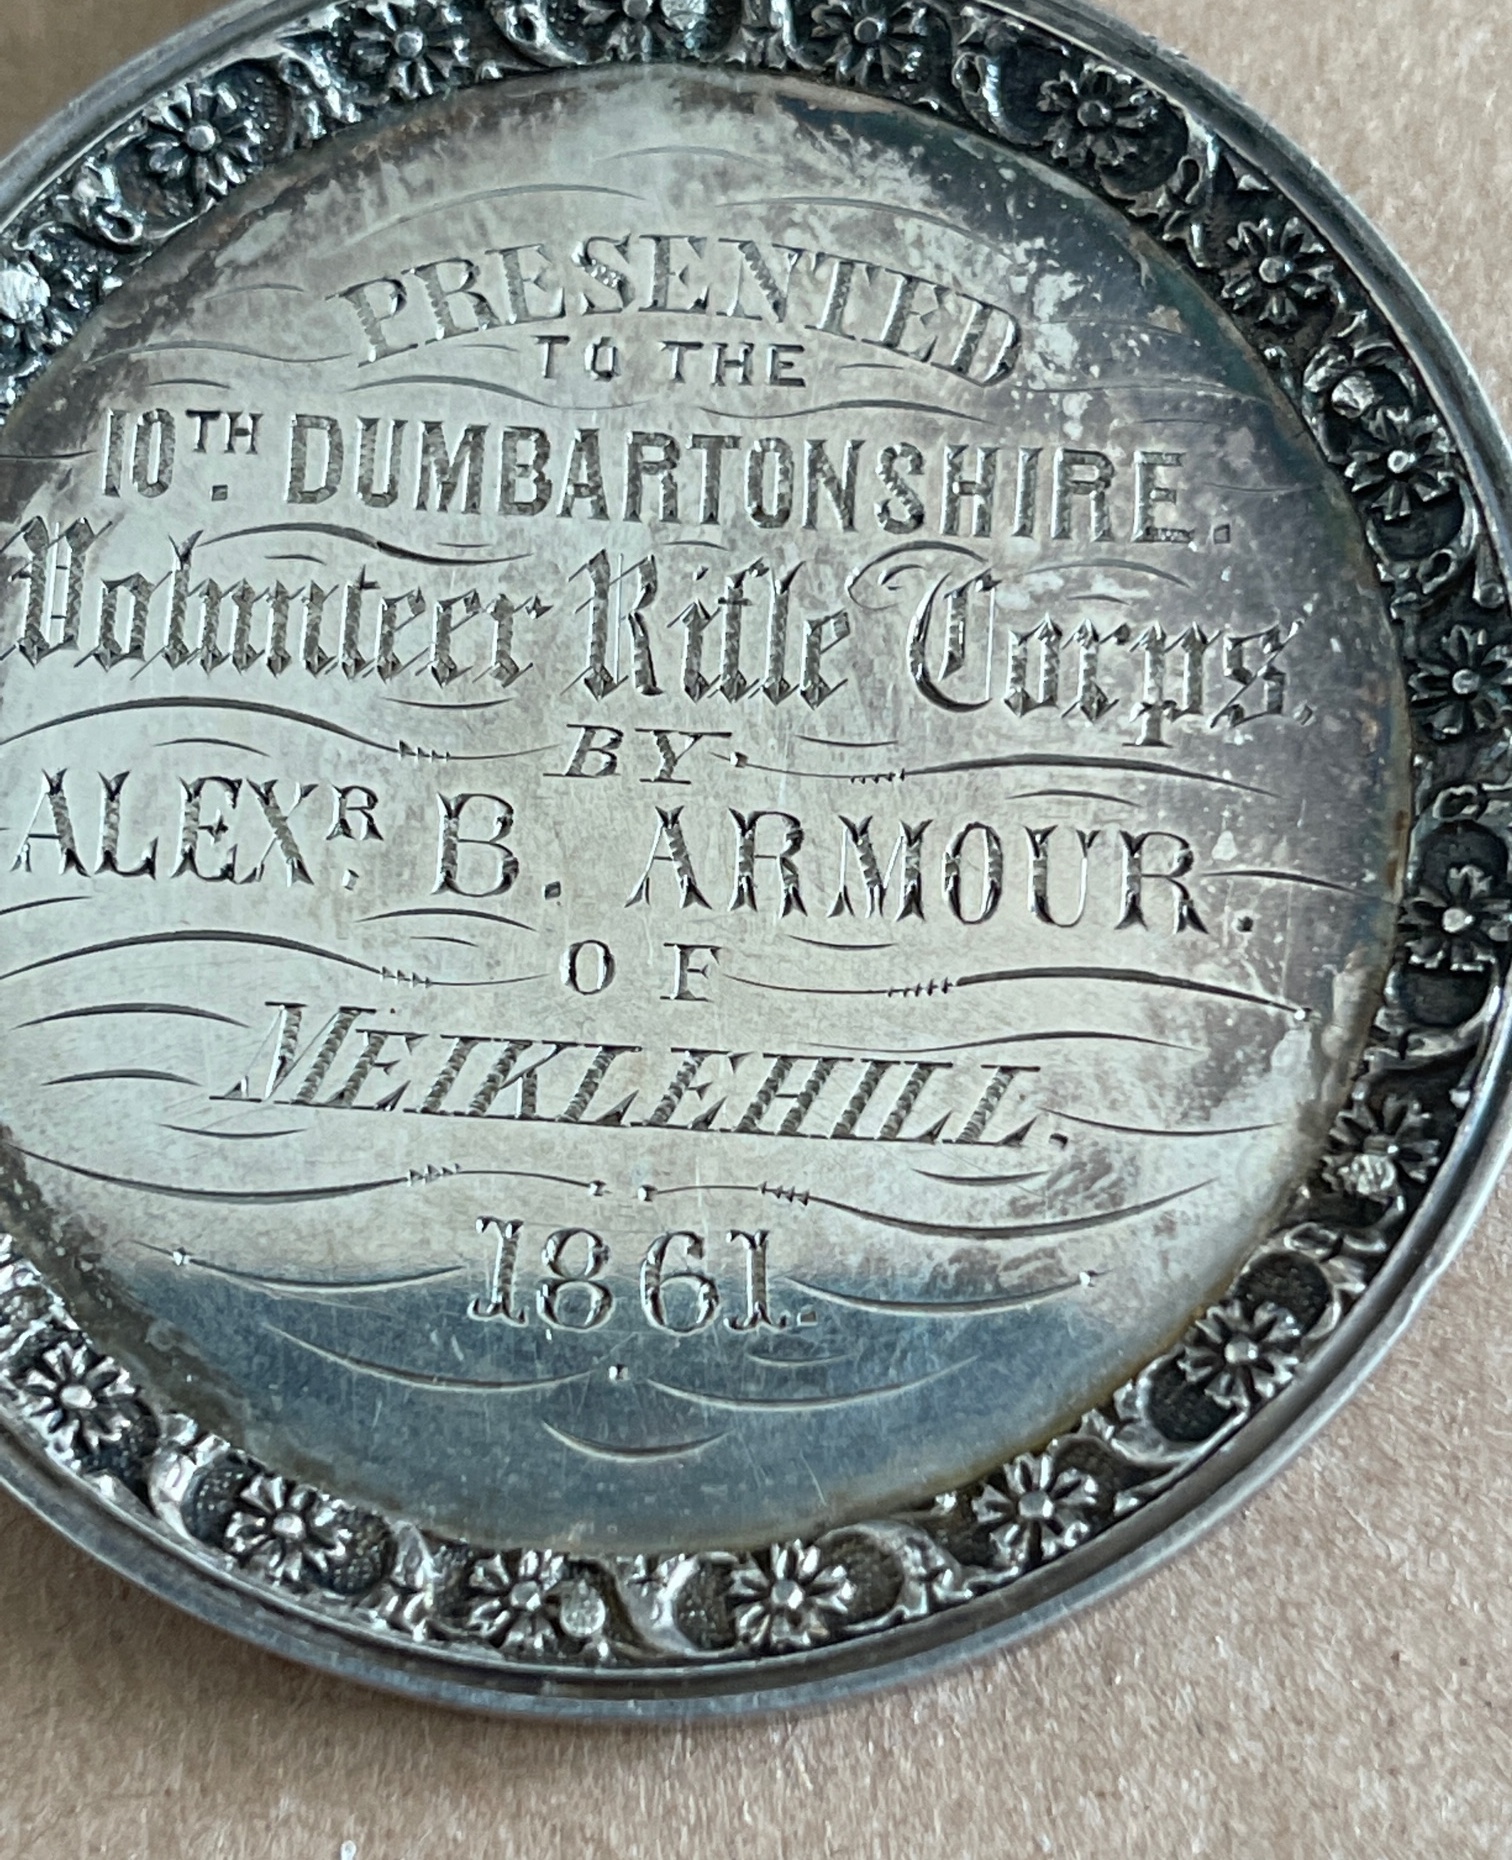 Antique Silver 10th Dunbartonshire Volunteer Rifle Corps Medal awarded to a Colour Sergt Calder 1865 - Image 2 of 4